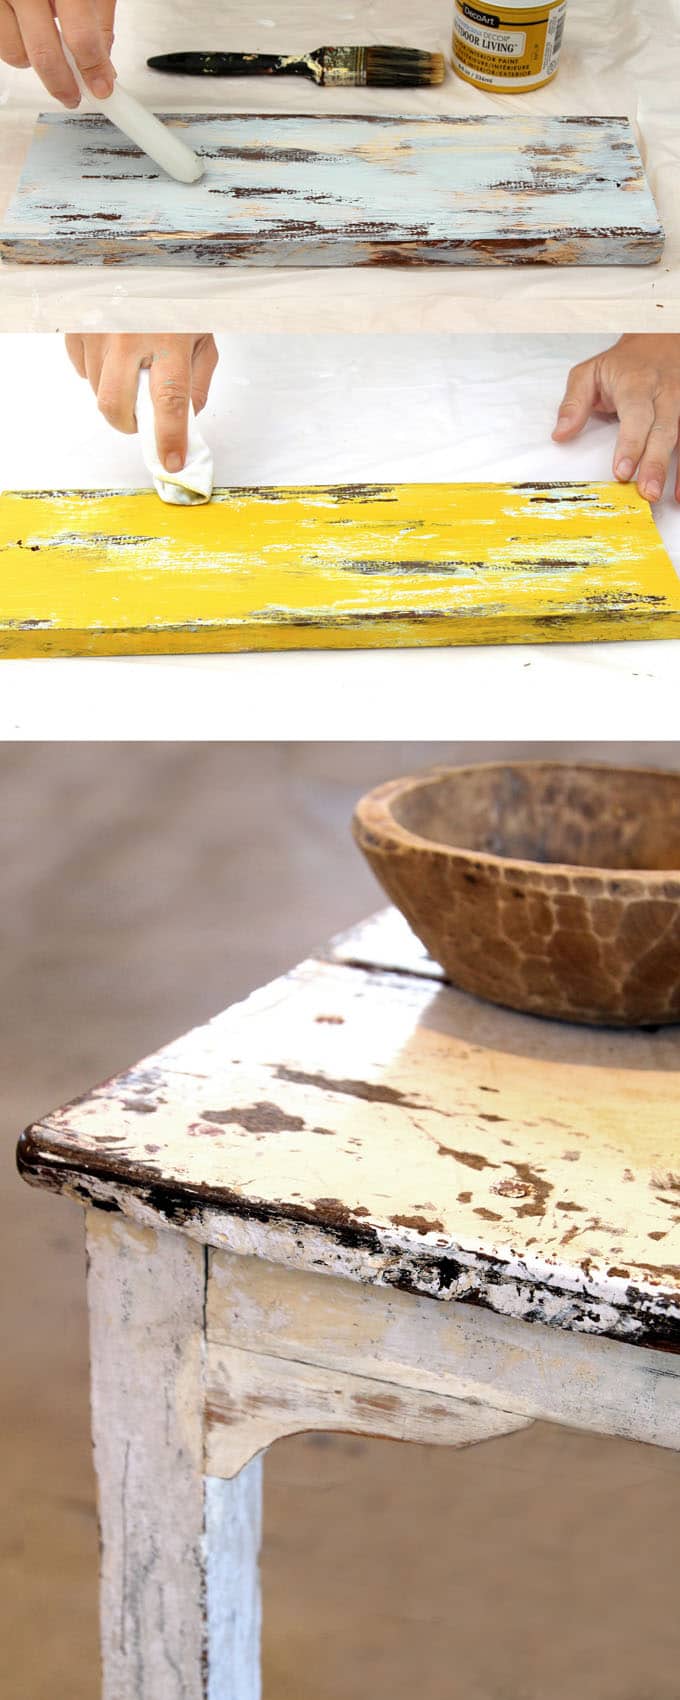 Ultimate guide on how to distress wood and furniture. Video tutorials of 7 easy painting techniques that give great results of aged look using simple tools. via A Piece Of Rainbow